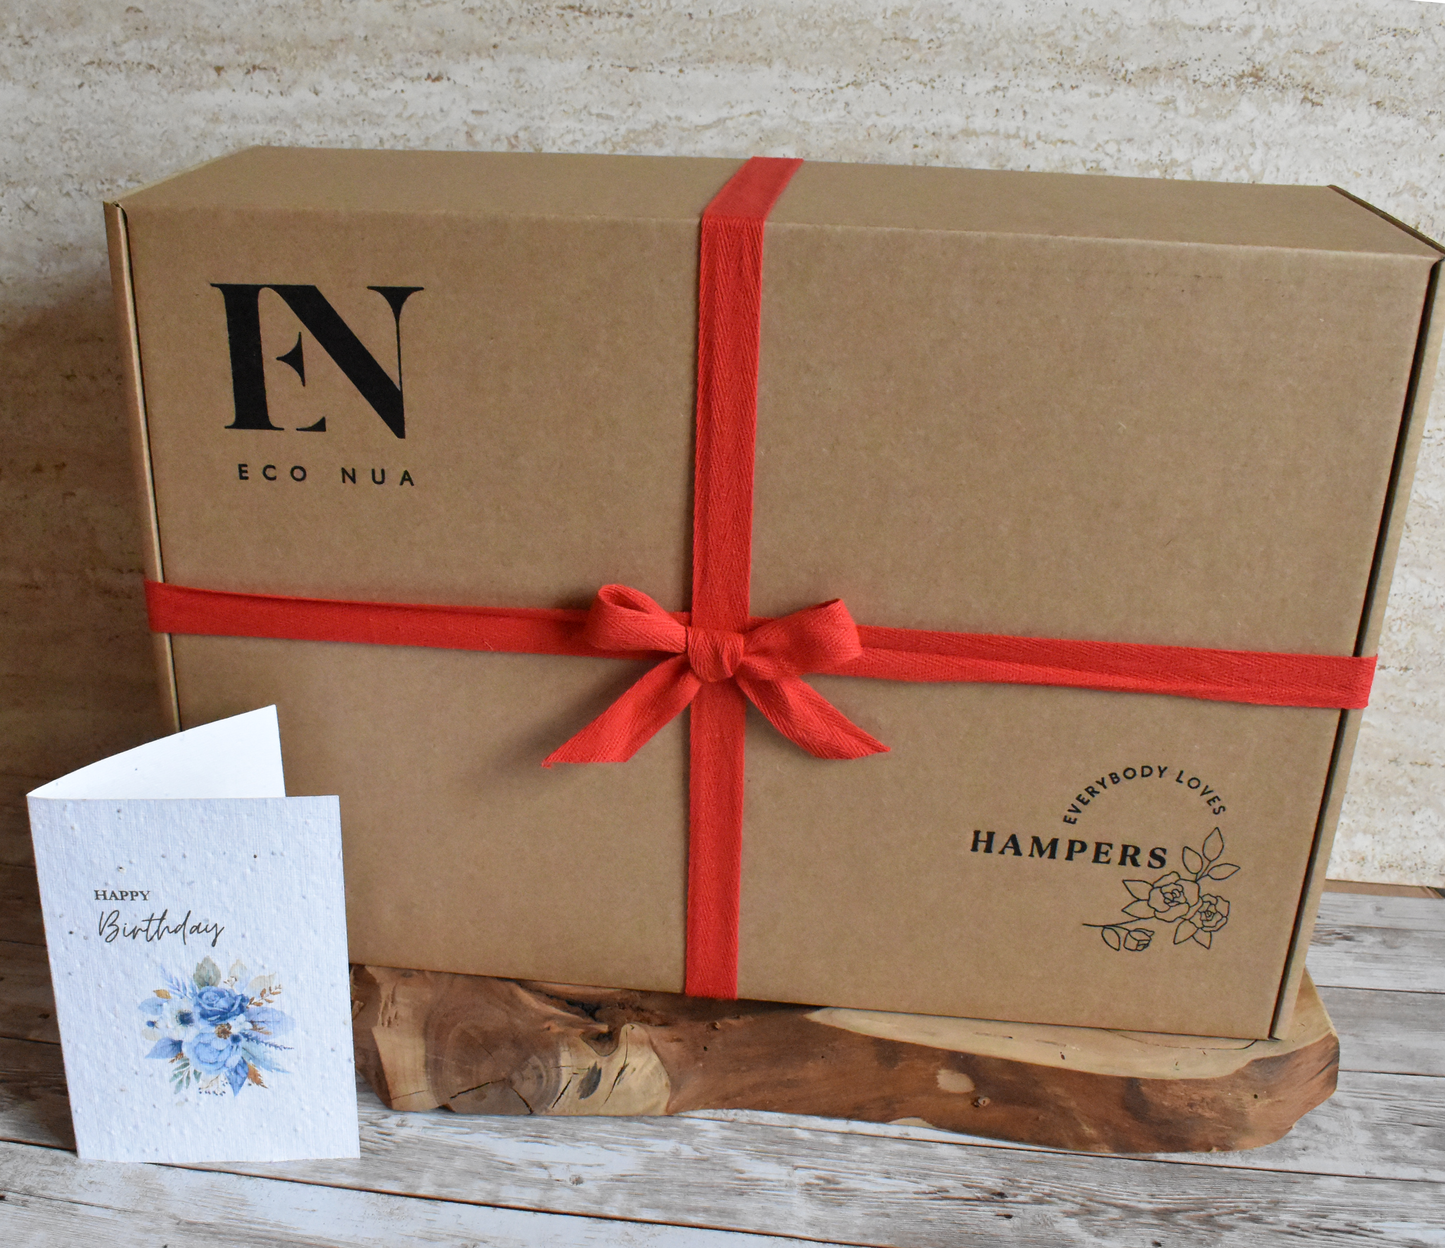 Econua "Gin Lover's" Hamper (non-alcoholic) - non alcoholic Warners Juniper Dry Gin, Aromatherapy  Candle in our Zodiac Scent or Signature Fragrance | Olives | Chocolate Bars | Nuts | Personalised Seed Paper Card